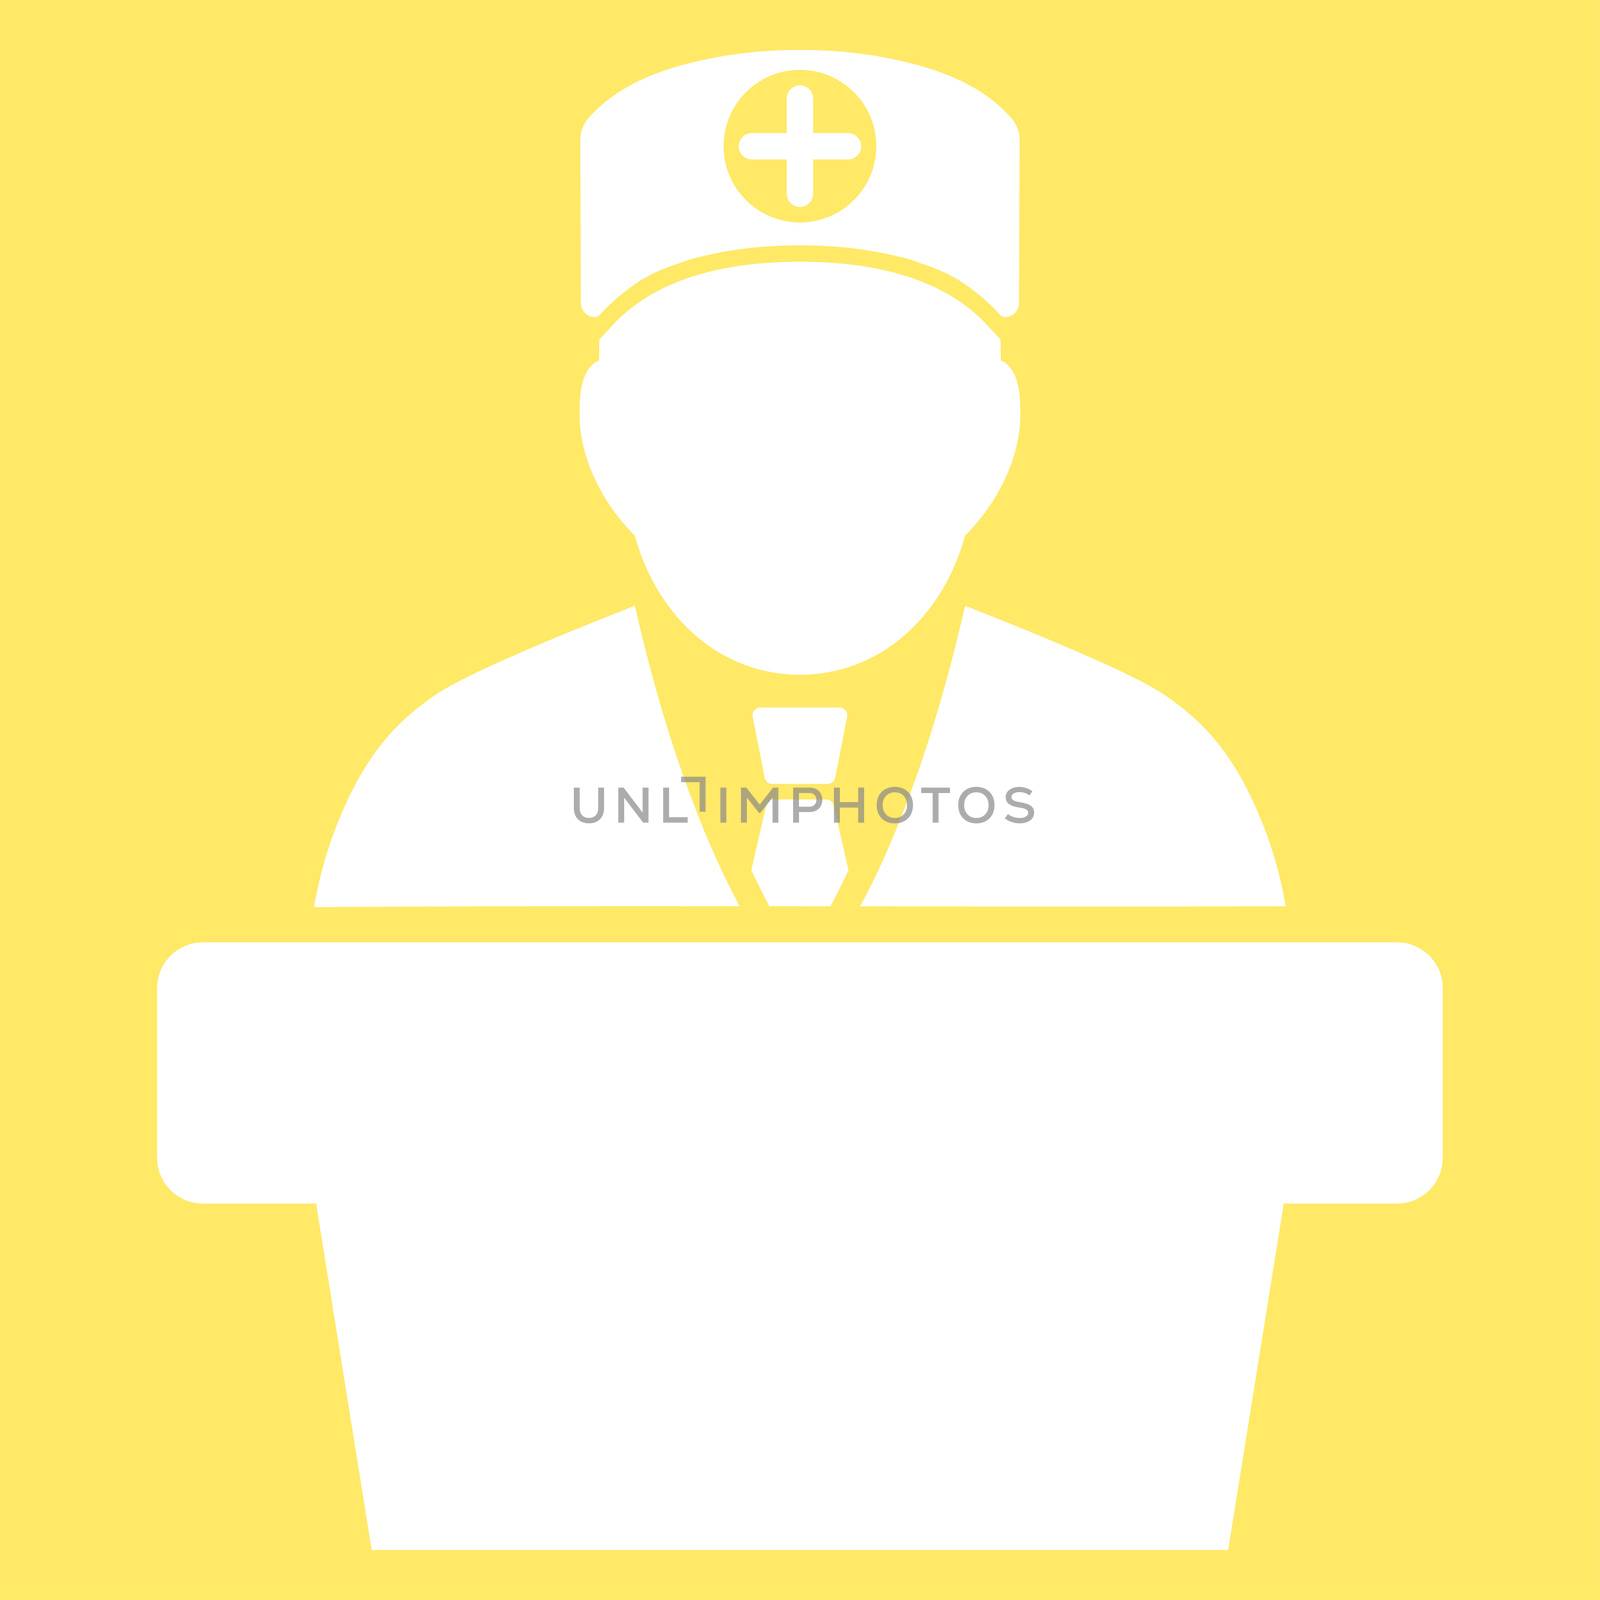 Medical Official Lecture raster icon. Style is flat symbol, white color, rounded angles, yellow background.